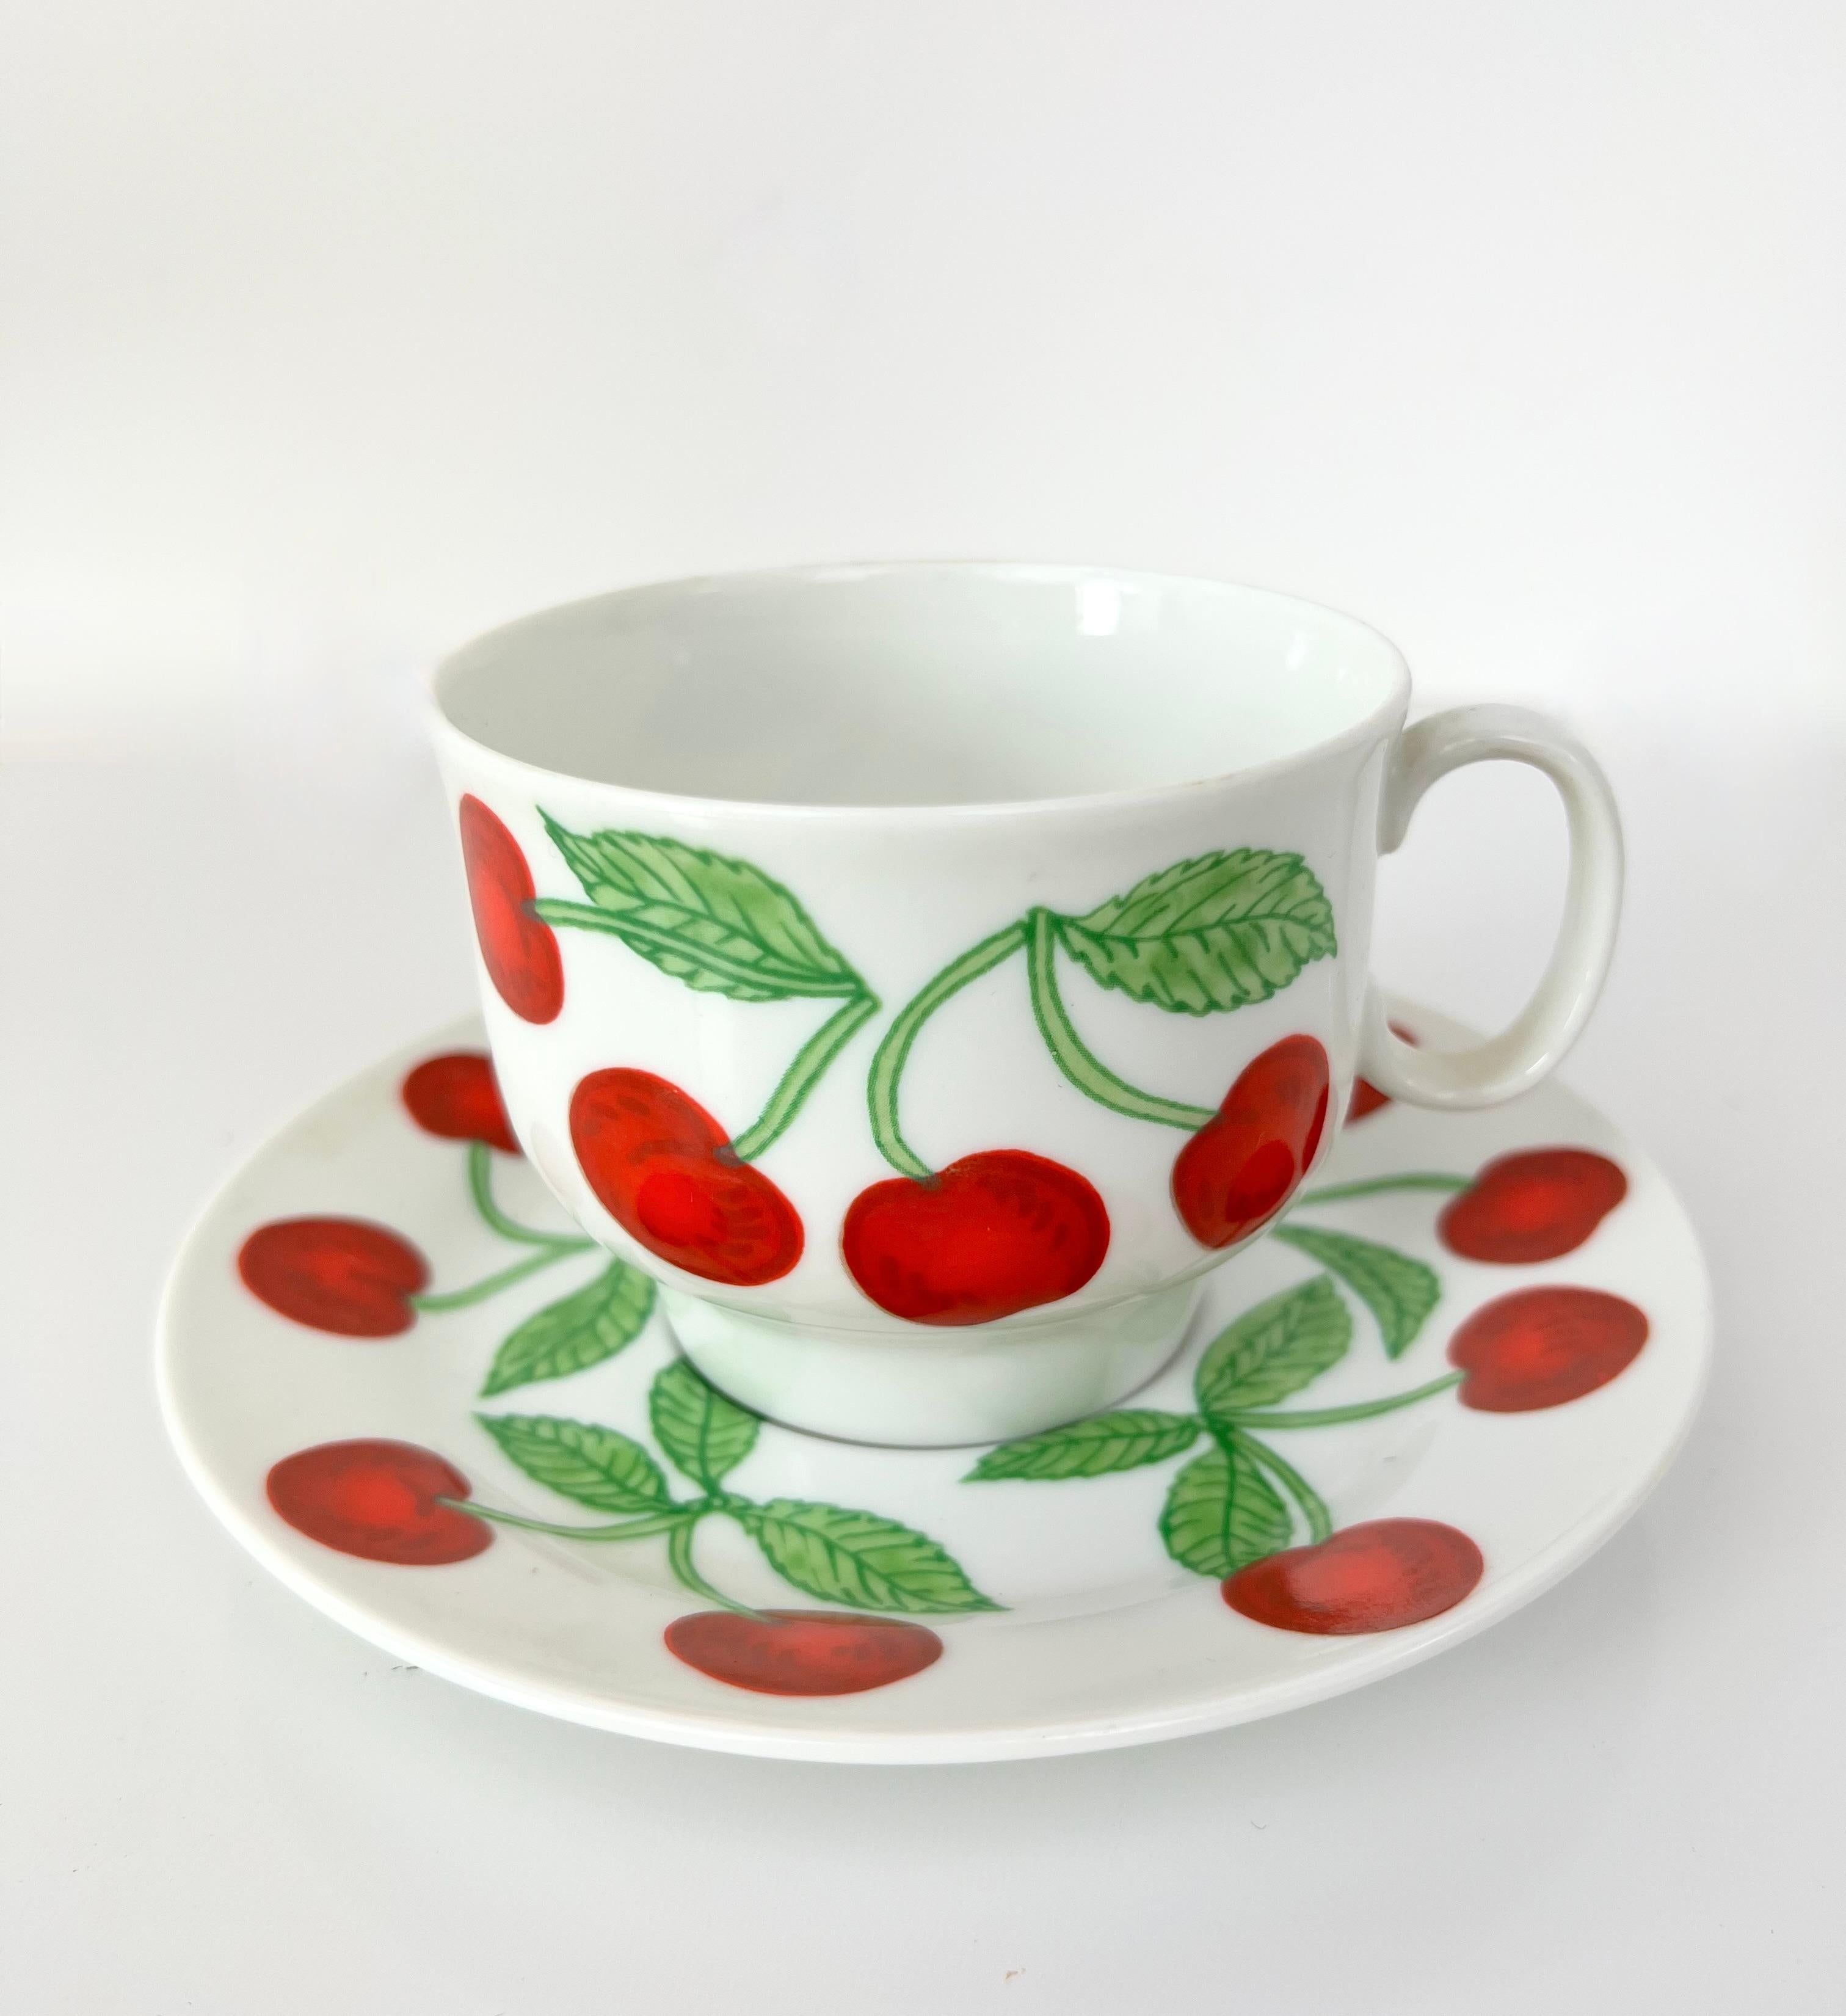 Richard Ginori porcelain coffee mug set featuring a charming bright cherry motif against a crisp white background.  Each coffee cup set includes a mug and saucer.